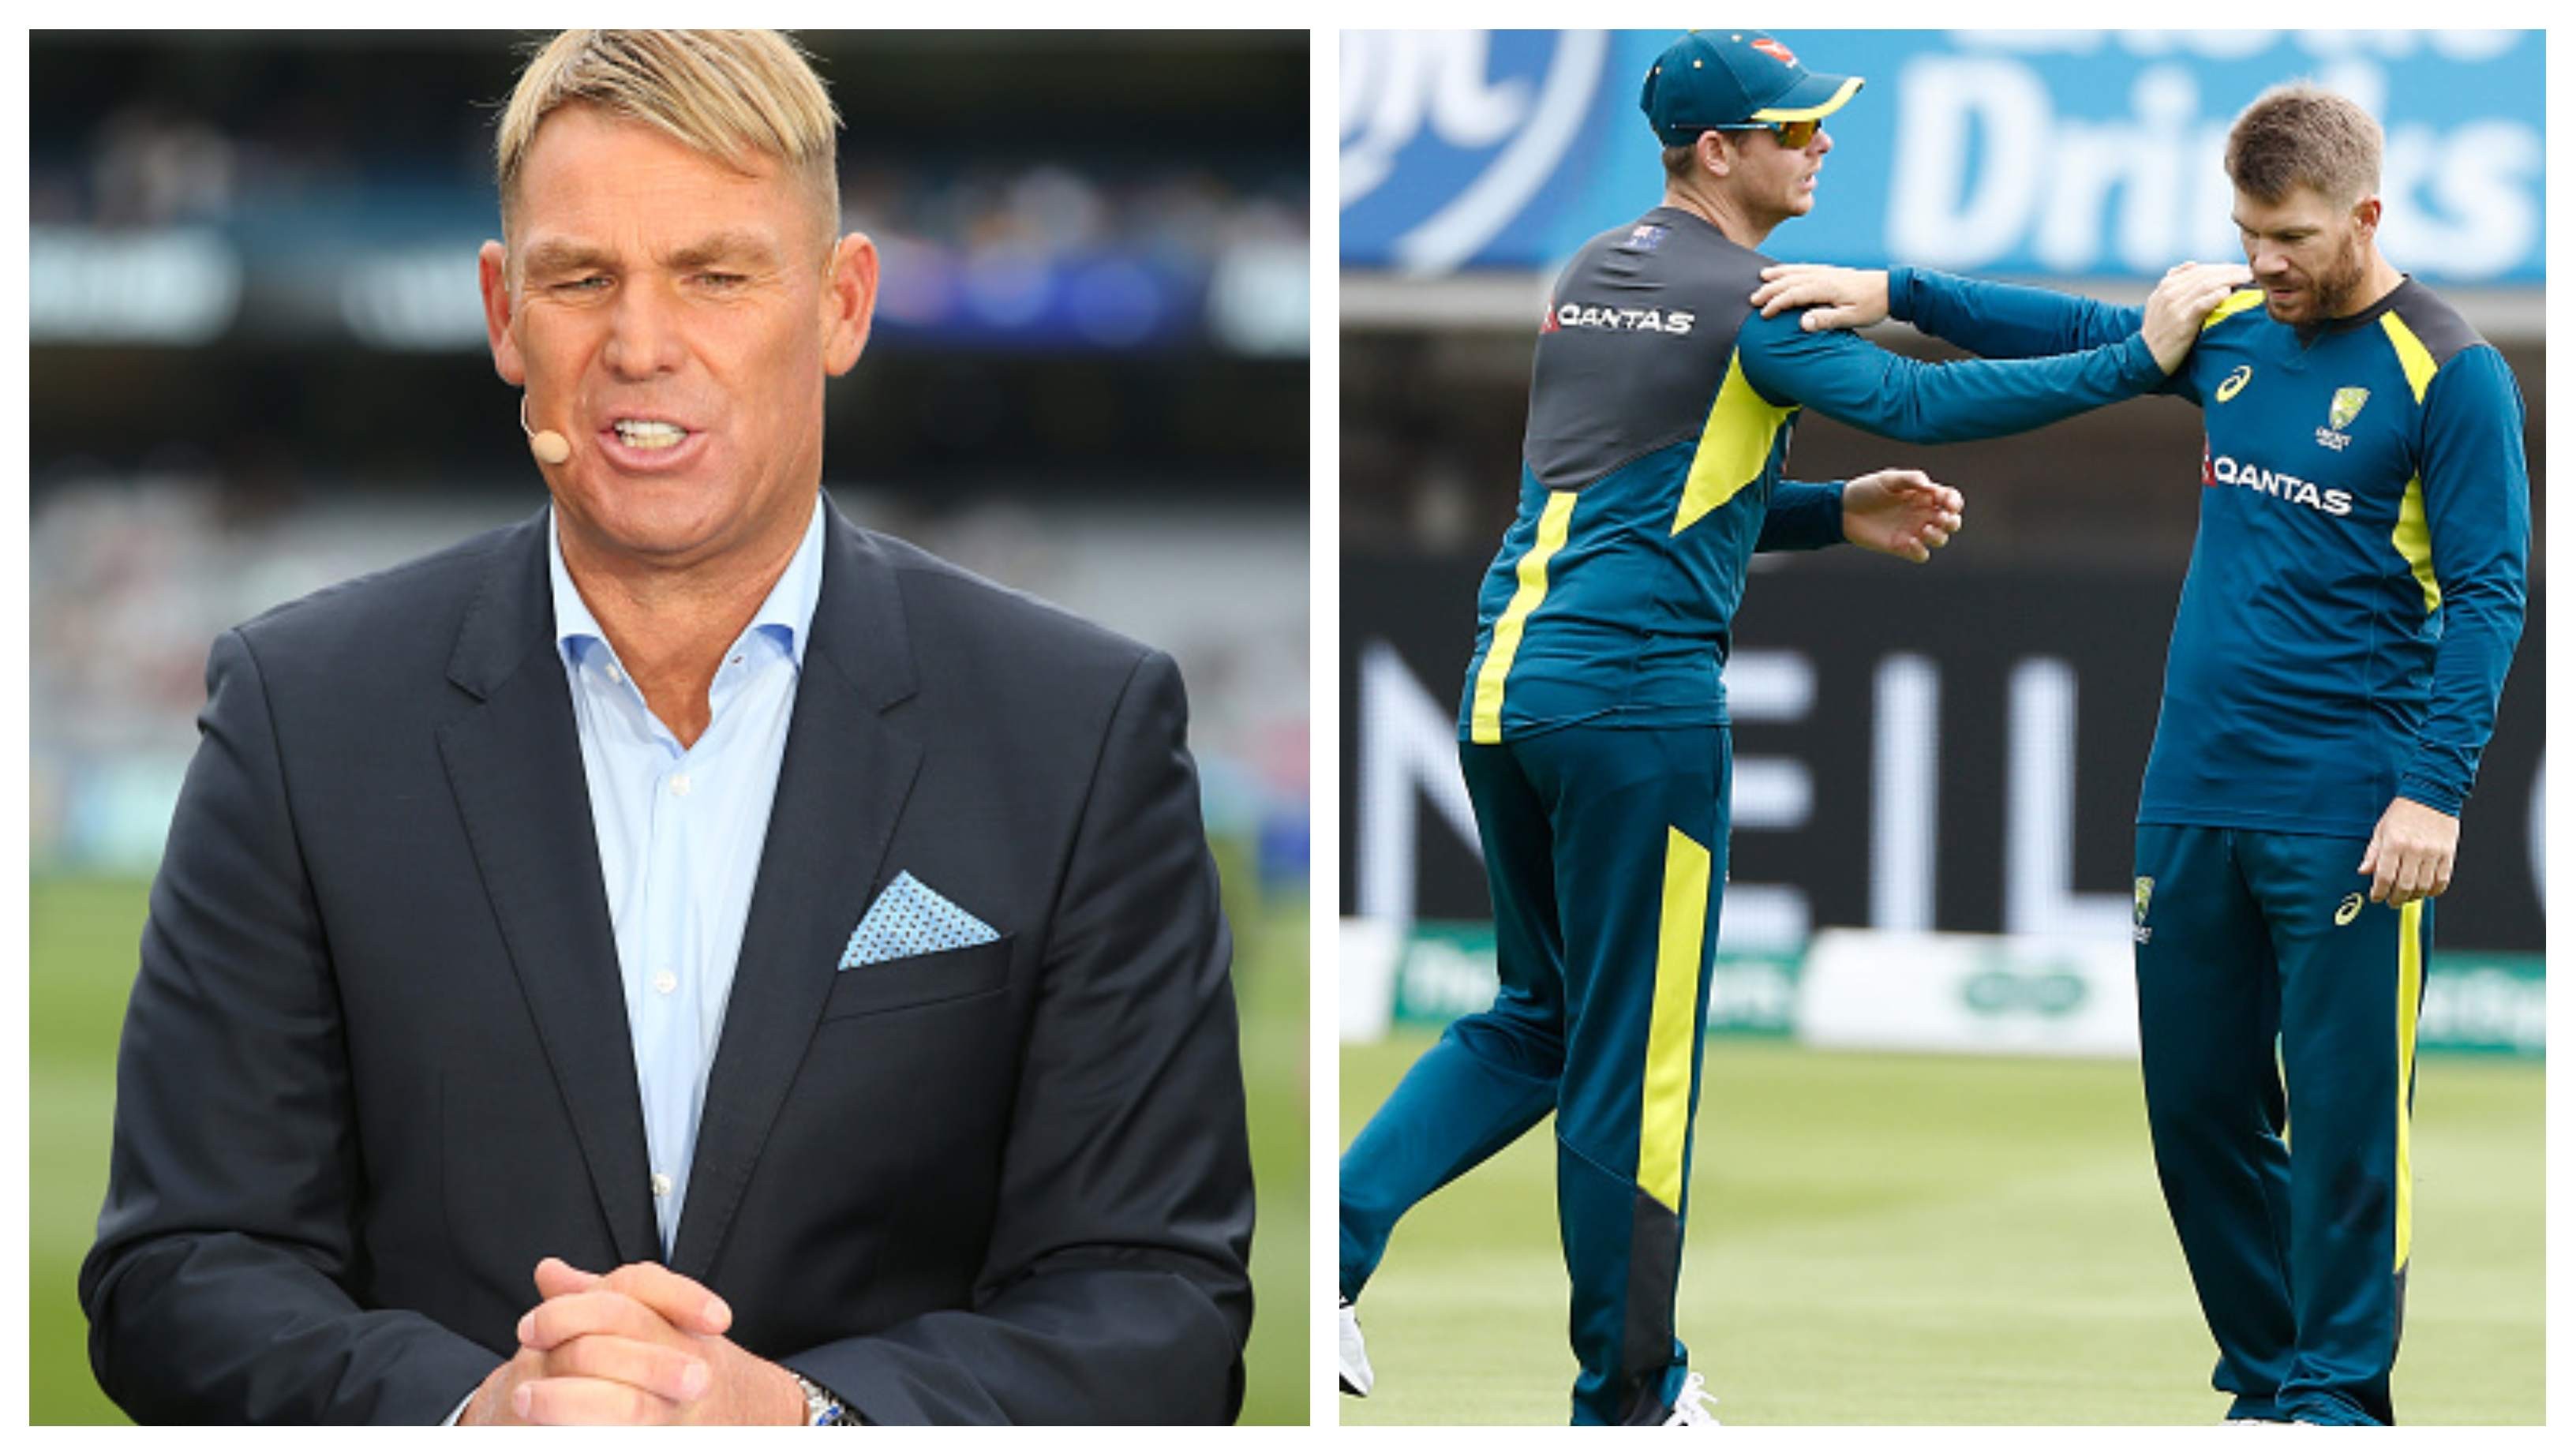 Shane Warne picks his all-time Australian Test XI; Smith, Warner miss out on selection